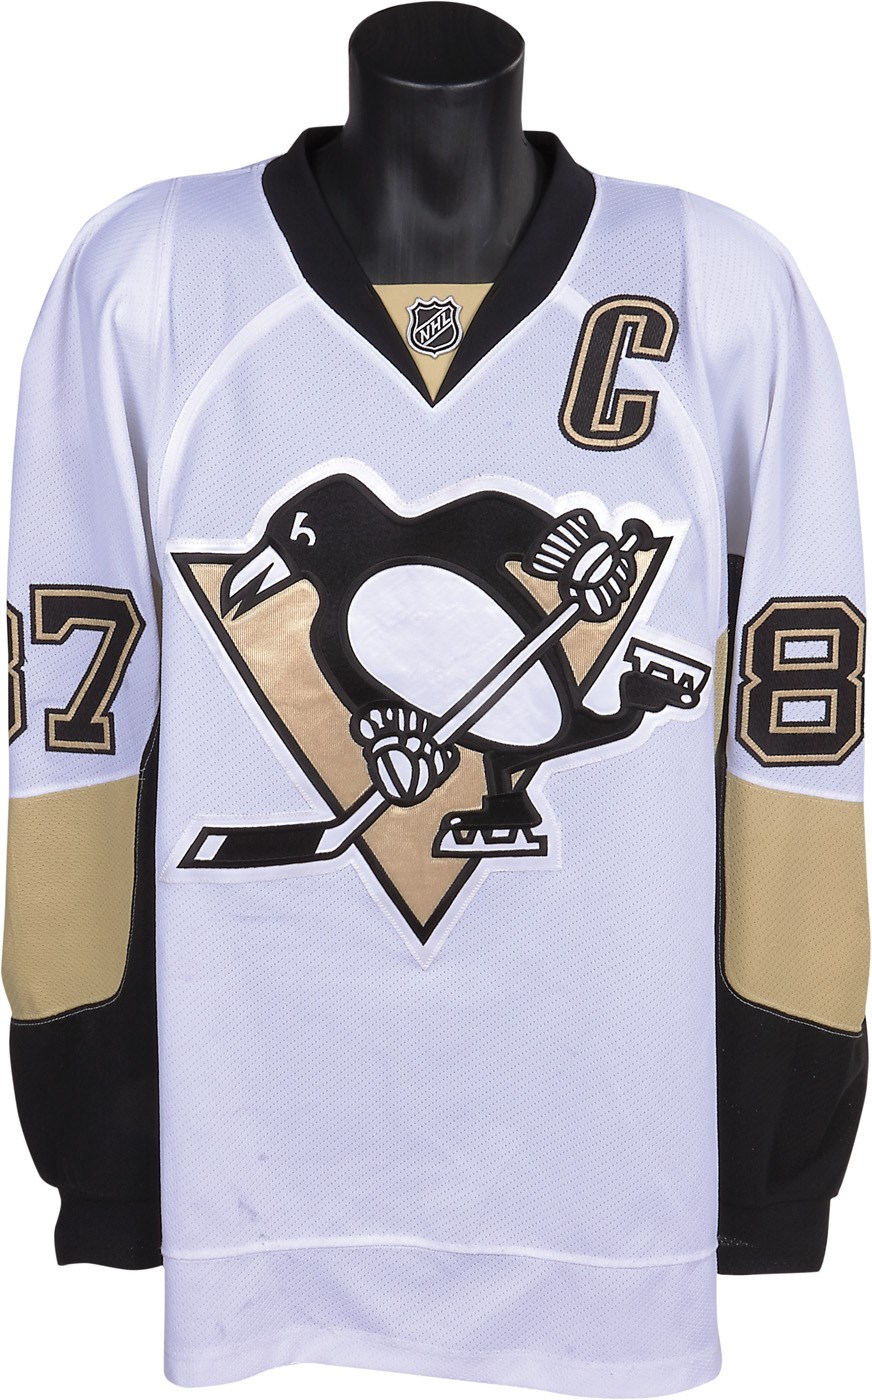 - 2015-16 Sidney Crosby Game Worn Pittsburgh Penguins Jersey - Photo-Matched & Worn in 17 Games (Penguins LOA & Jersey Trak)